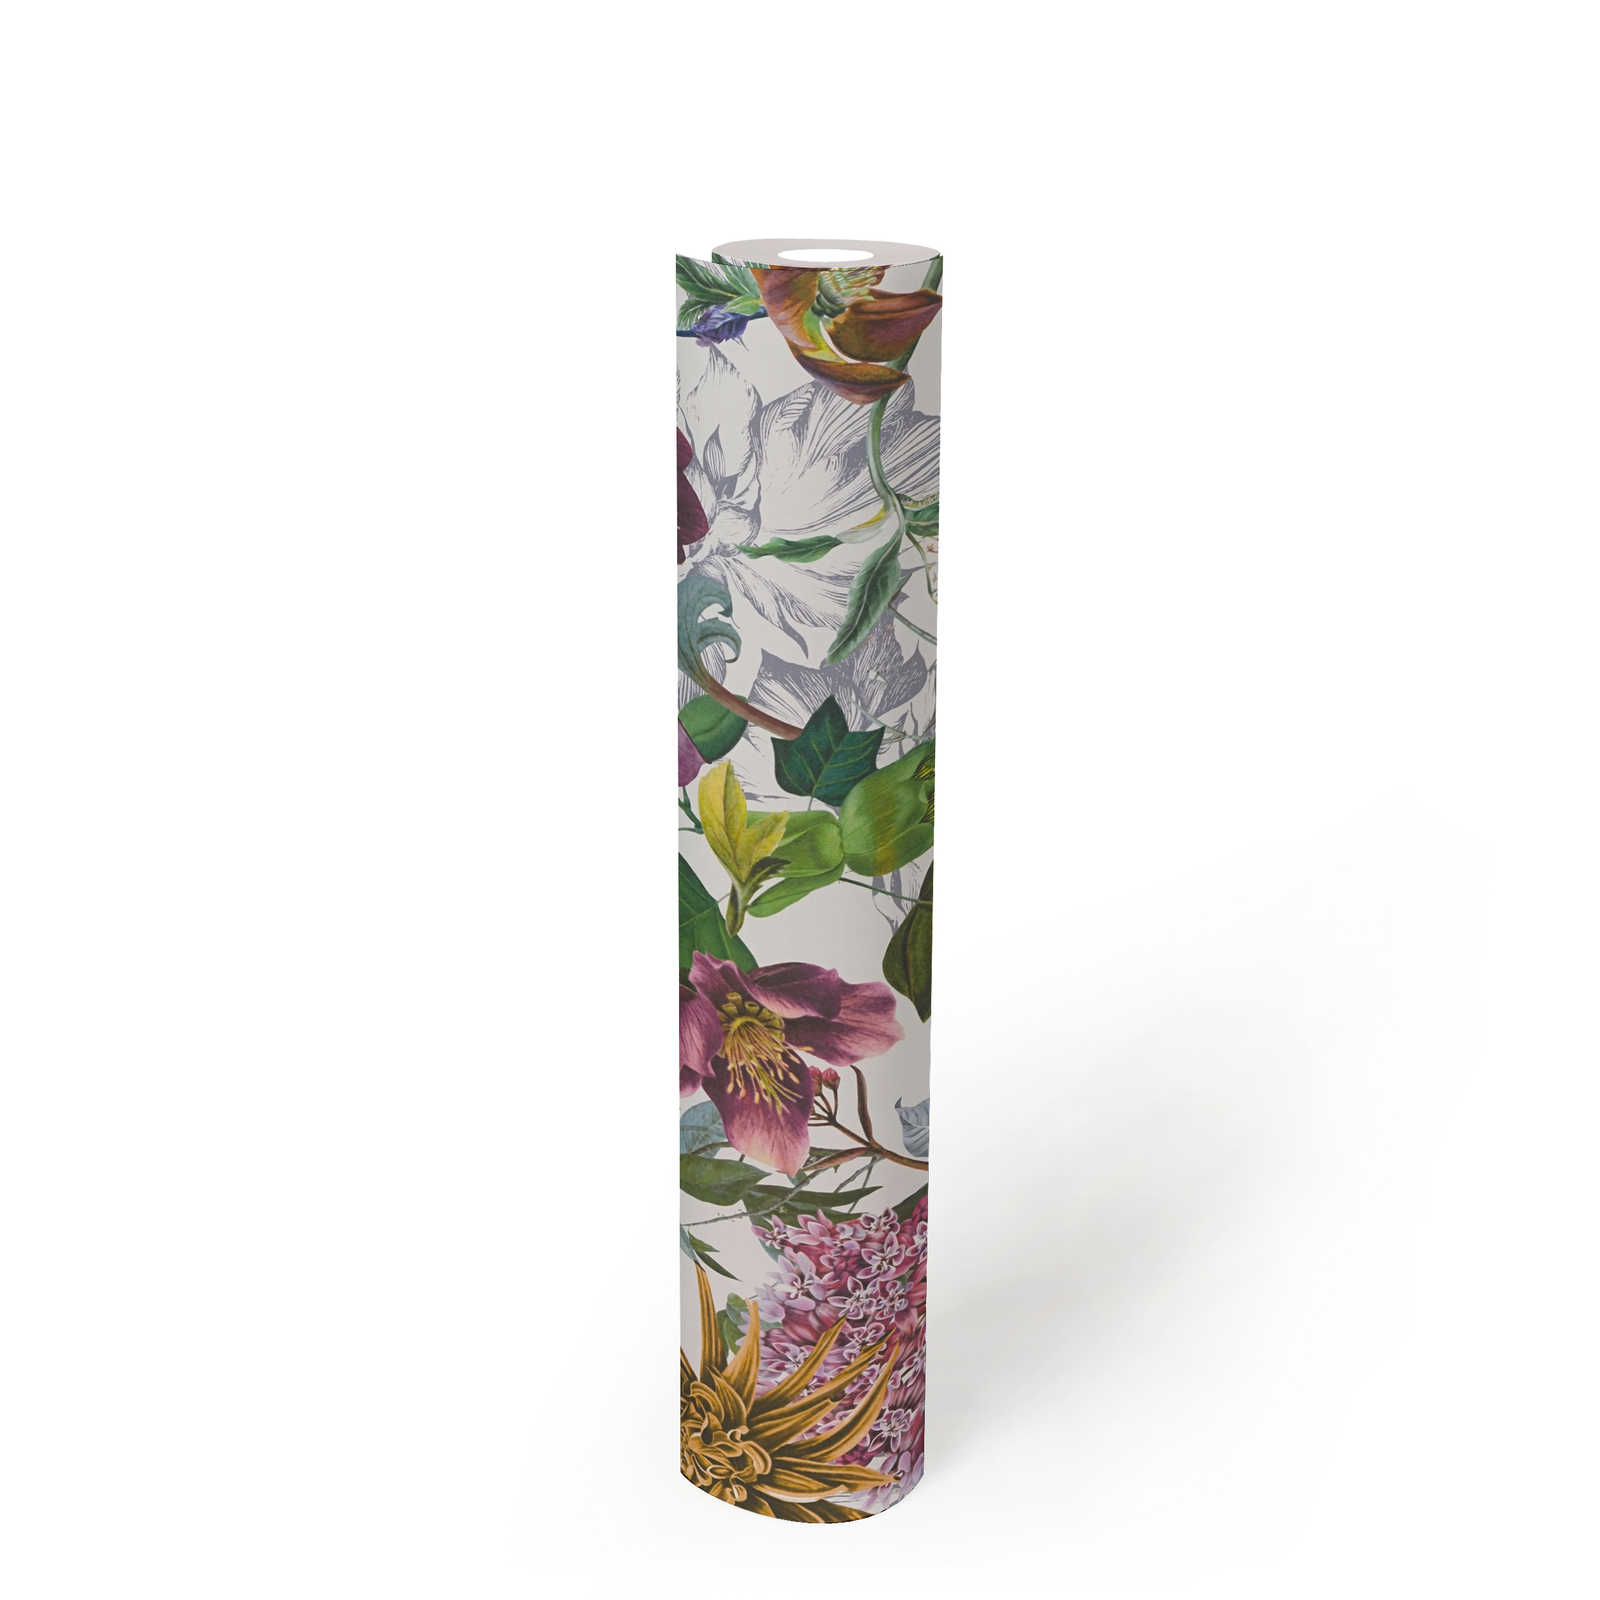             Floral wallpaper colourful with floral pattern - pink, green, yellow
        